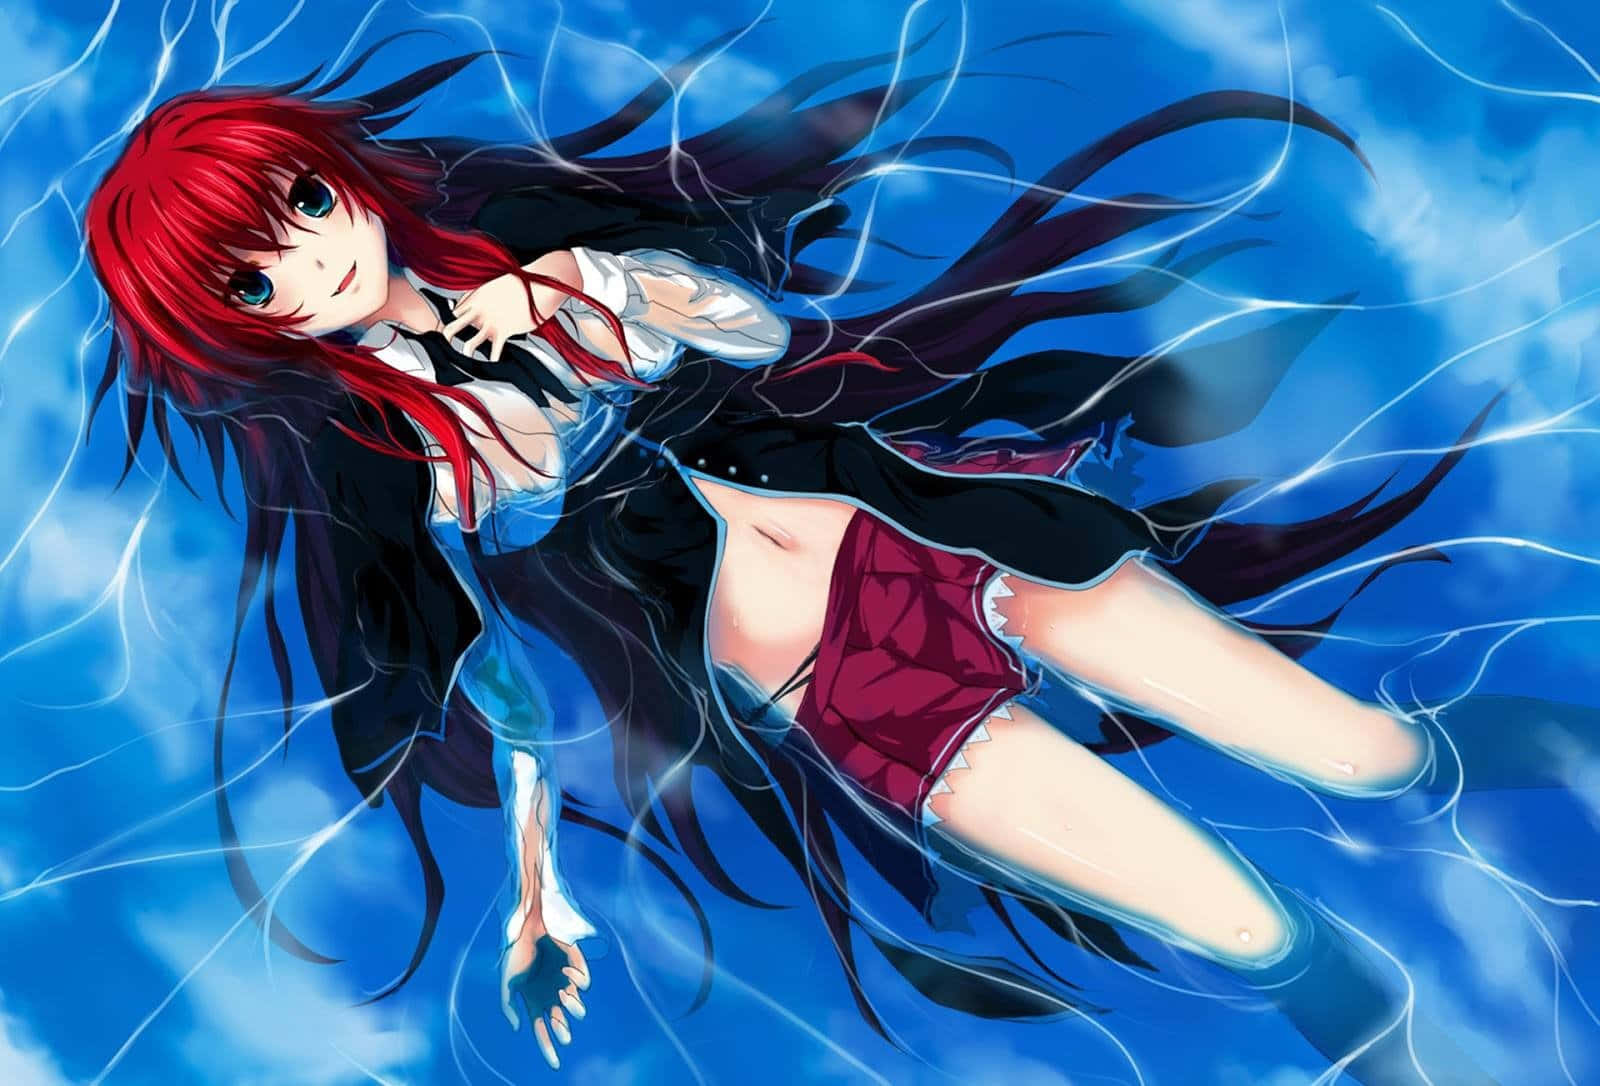 High School DXD Shines Brightly in a New Adventure.